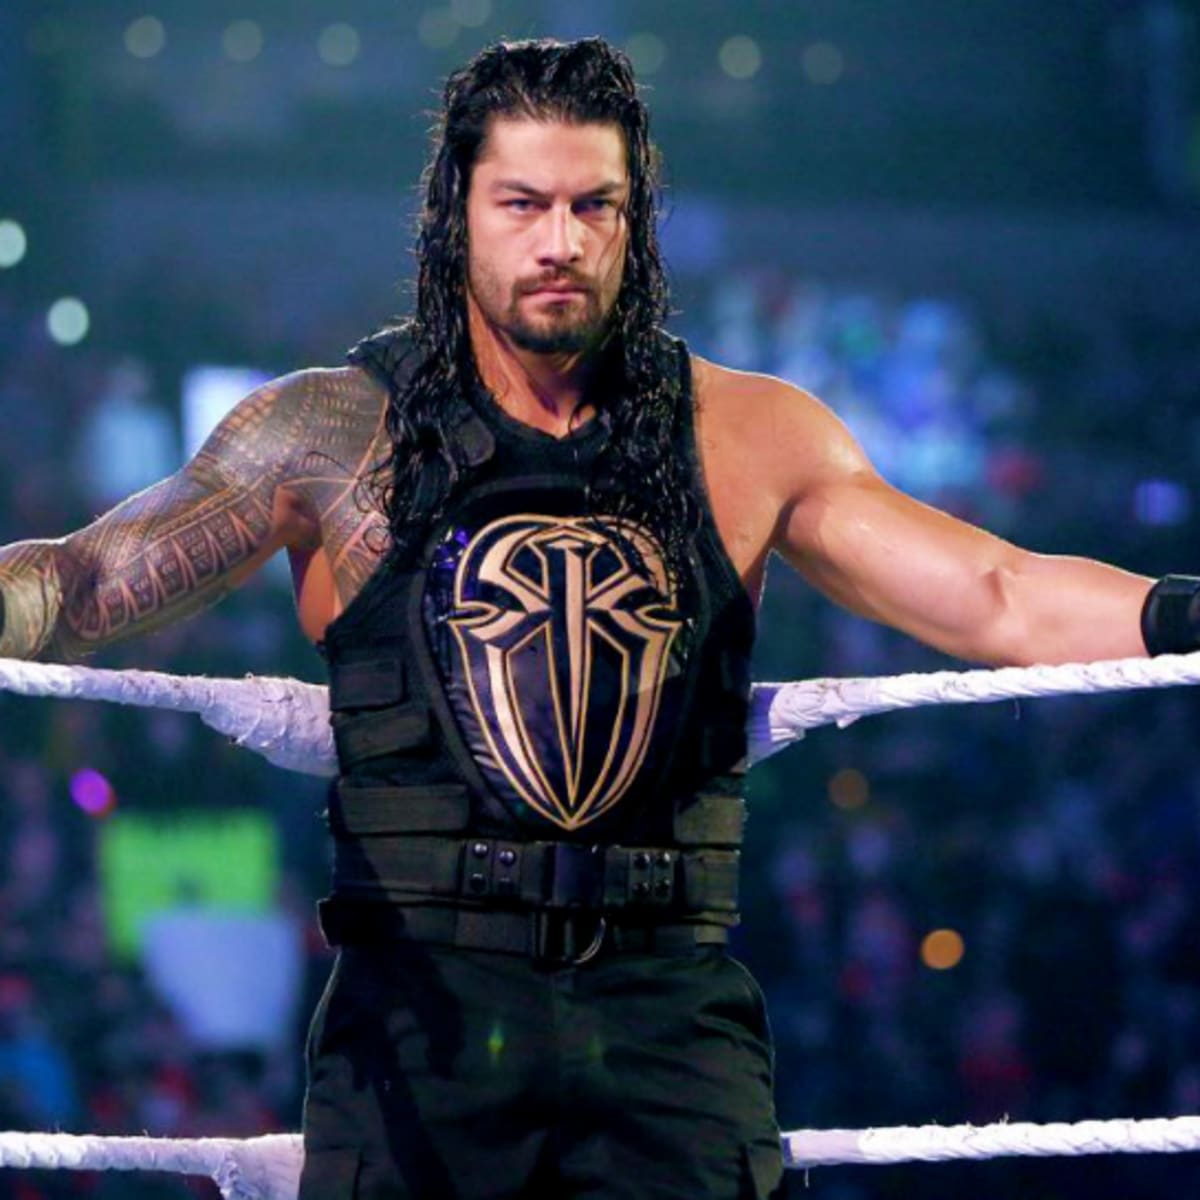 Roman Reigns No Longer Scheduled For WWE Money In The Bank F4W News, Pro Wrestling News, WWE Results, AEW News, AEW Results